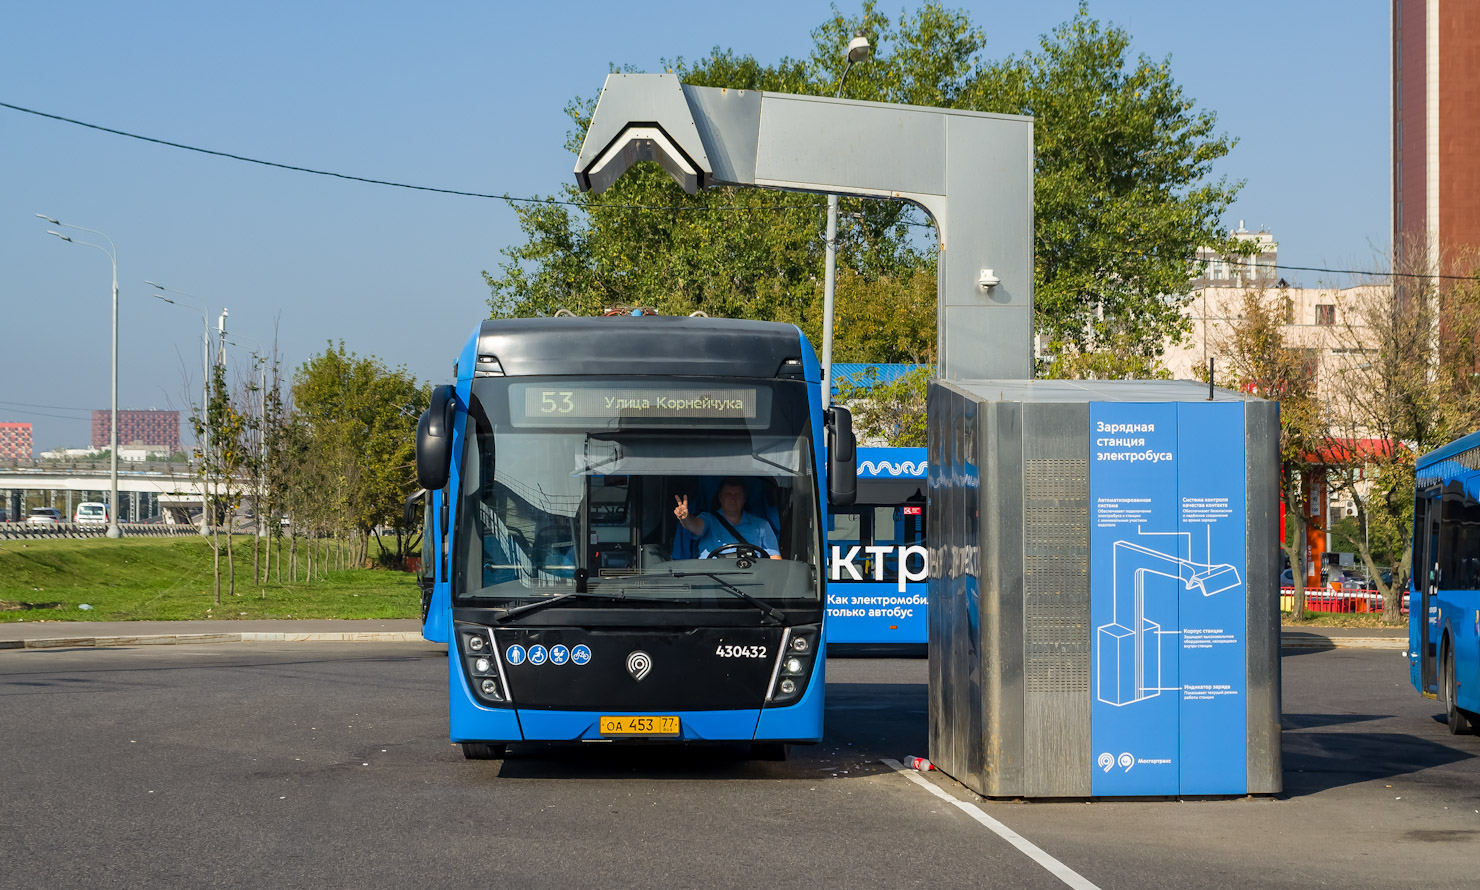 Moscow, KAMAZ-6282 № 430432; Moscow — Electric power service — Charging stations; Moscow — Terminus stations